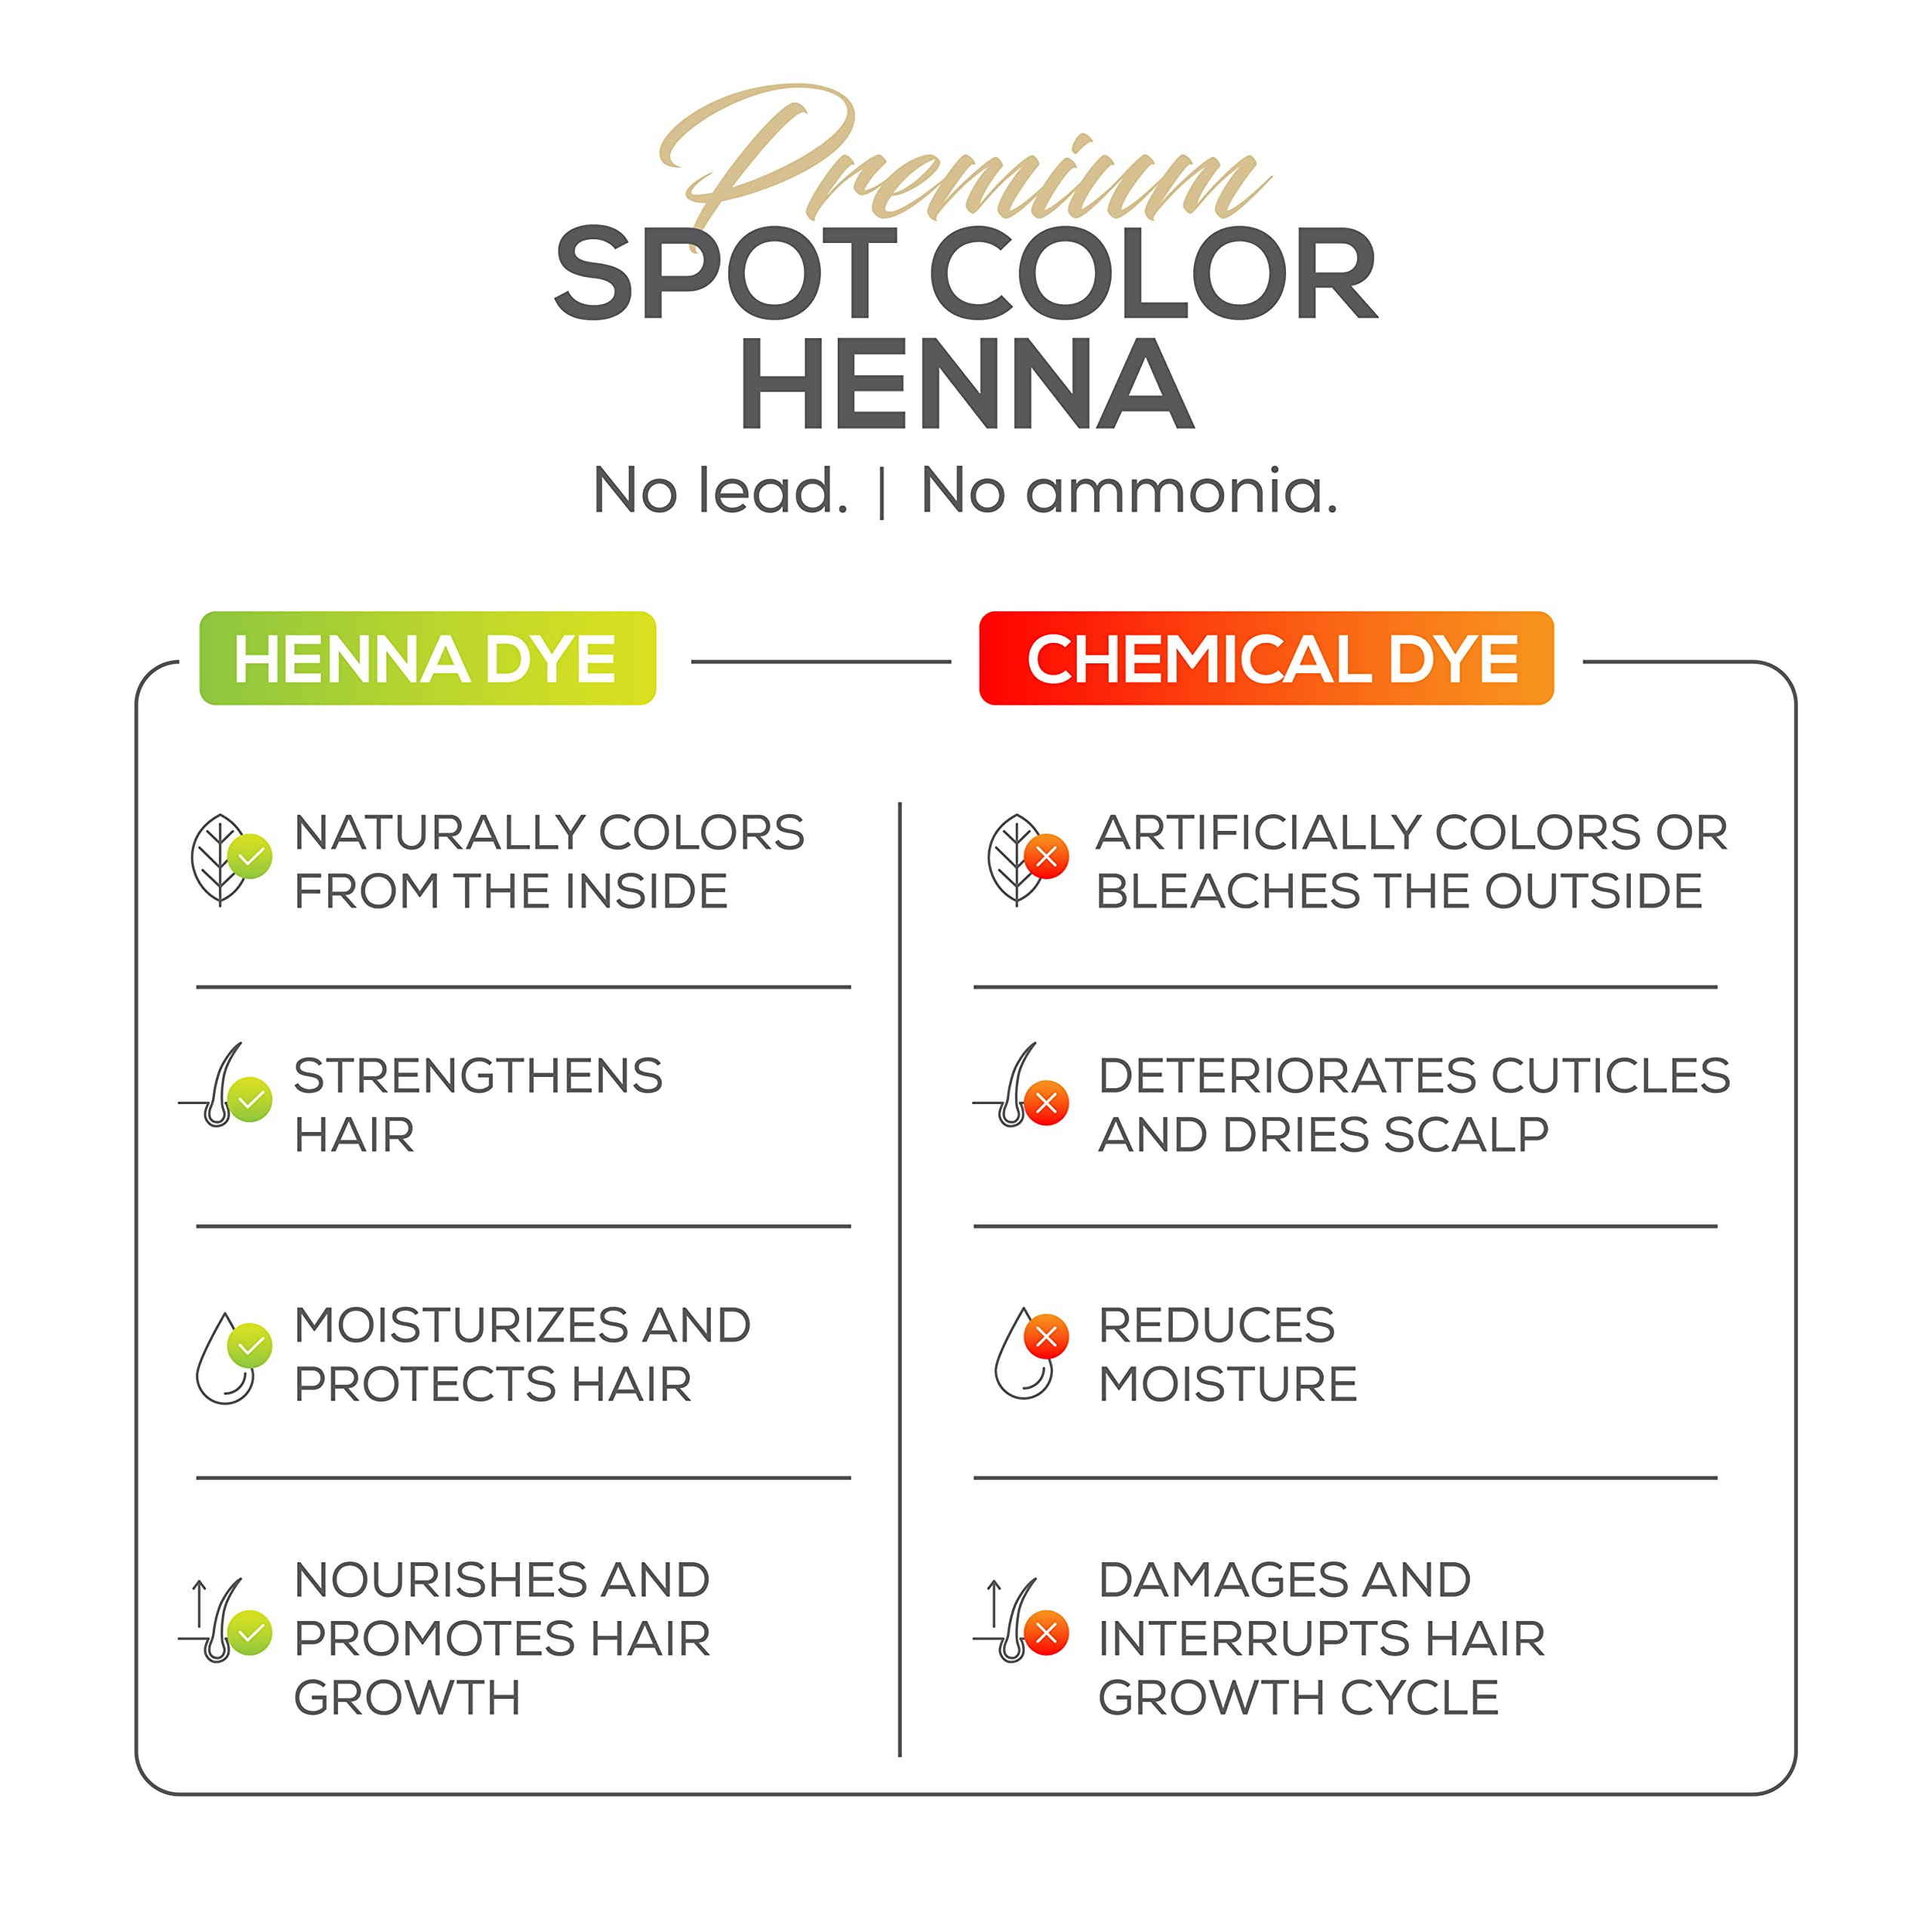 Parallel Products Spot Color Henna Kit - Henna Hair Dye - 3 grams - Tint for Professional Spot Coloring - With Mixing Dish - Covers Grey Hair - Root Touch Up (Medium Brown)